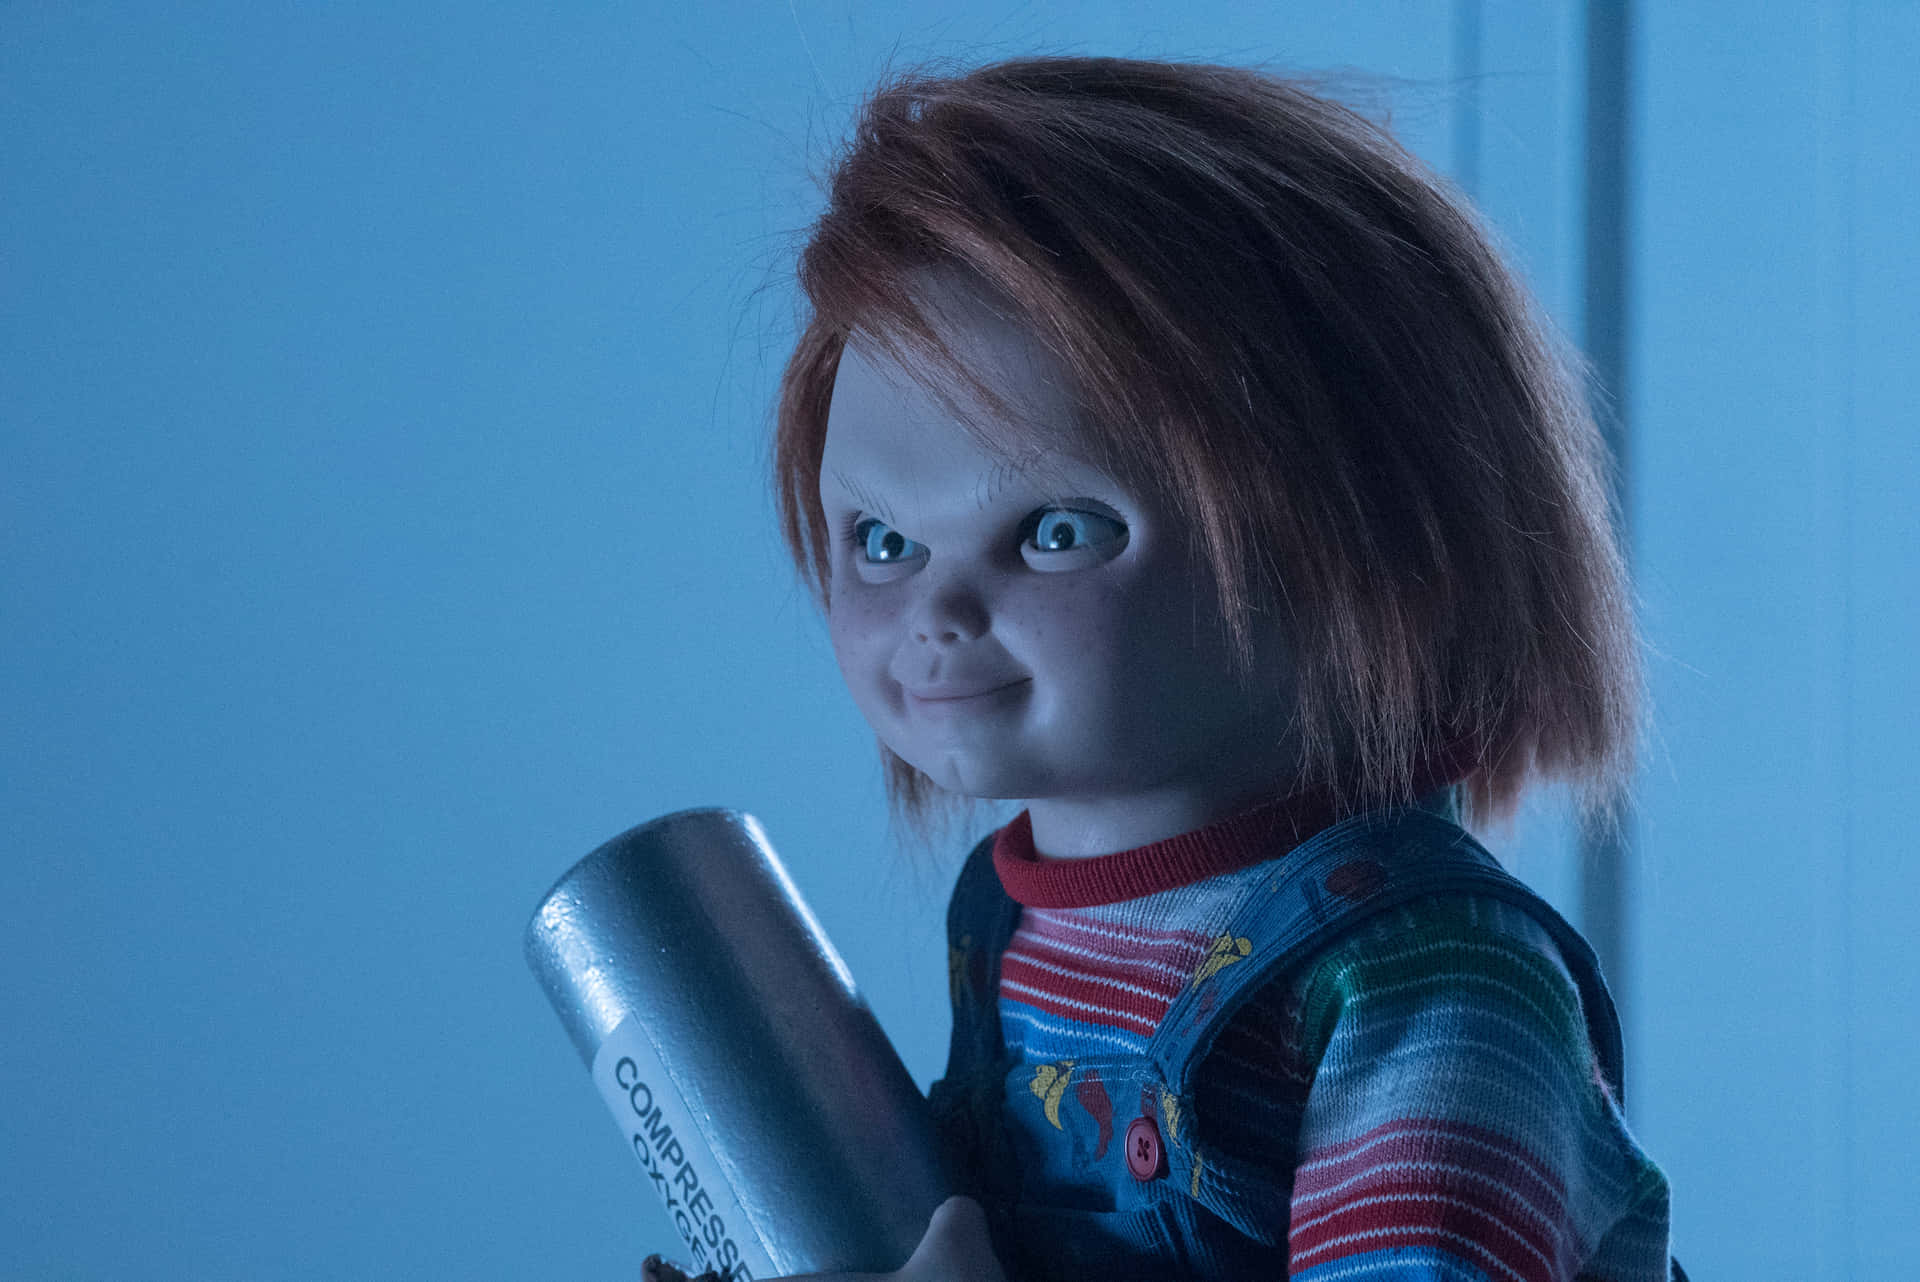 Caption: Chilling Close-up Shot Of Chucky Doll